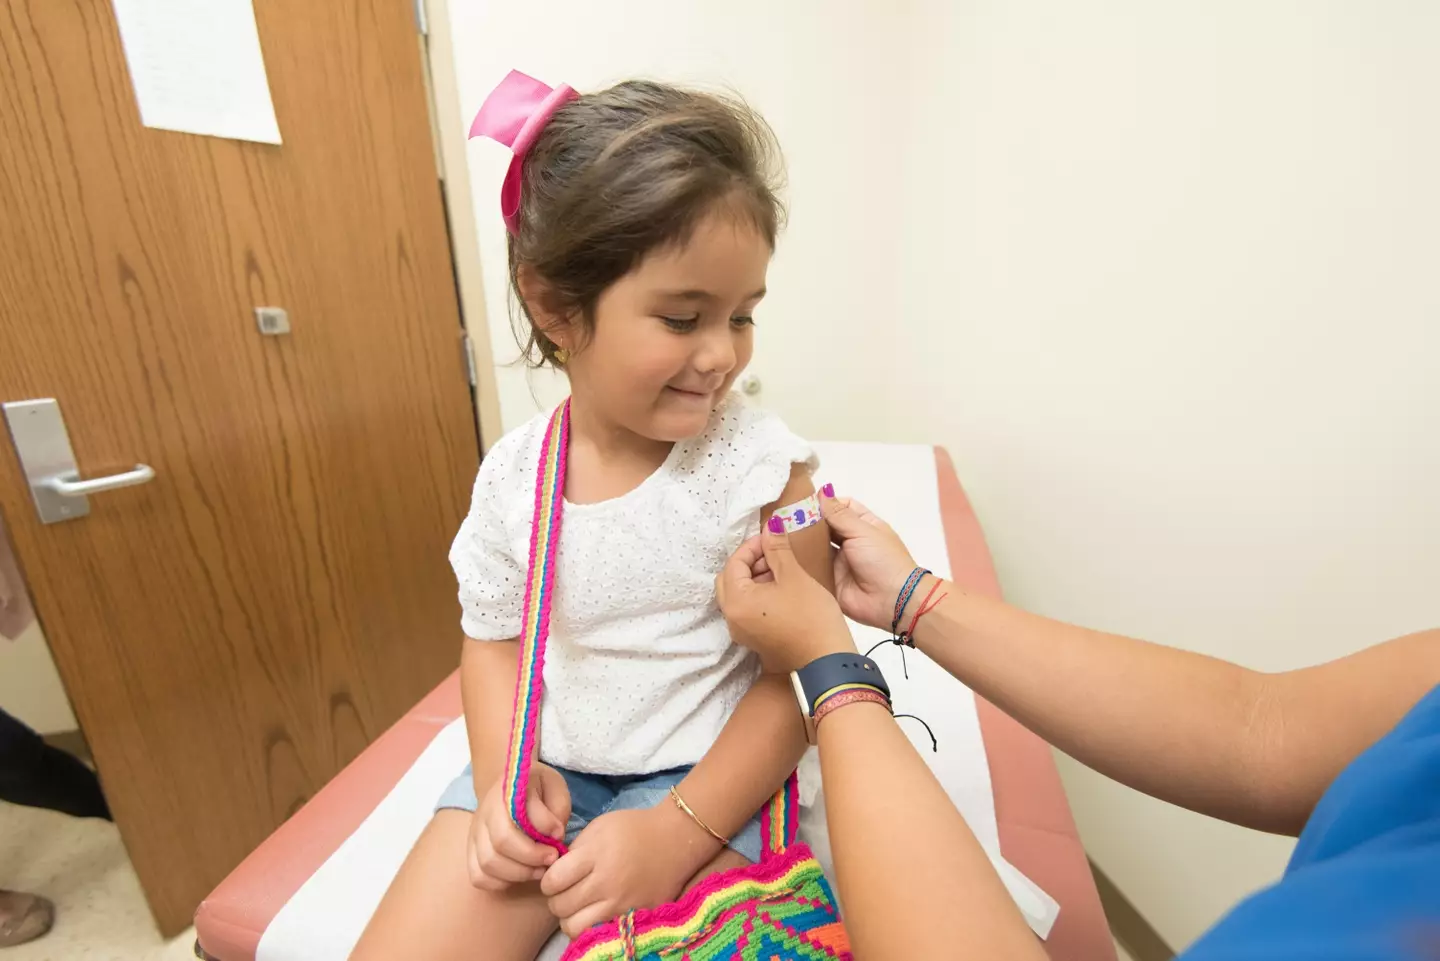 Parents have been urged to check their children are up to date with their MMR vaccinations as measles cases are on the rise.